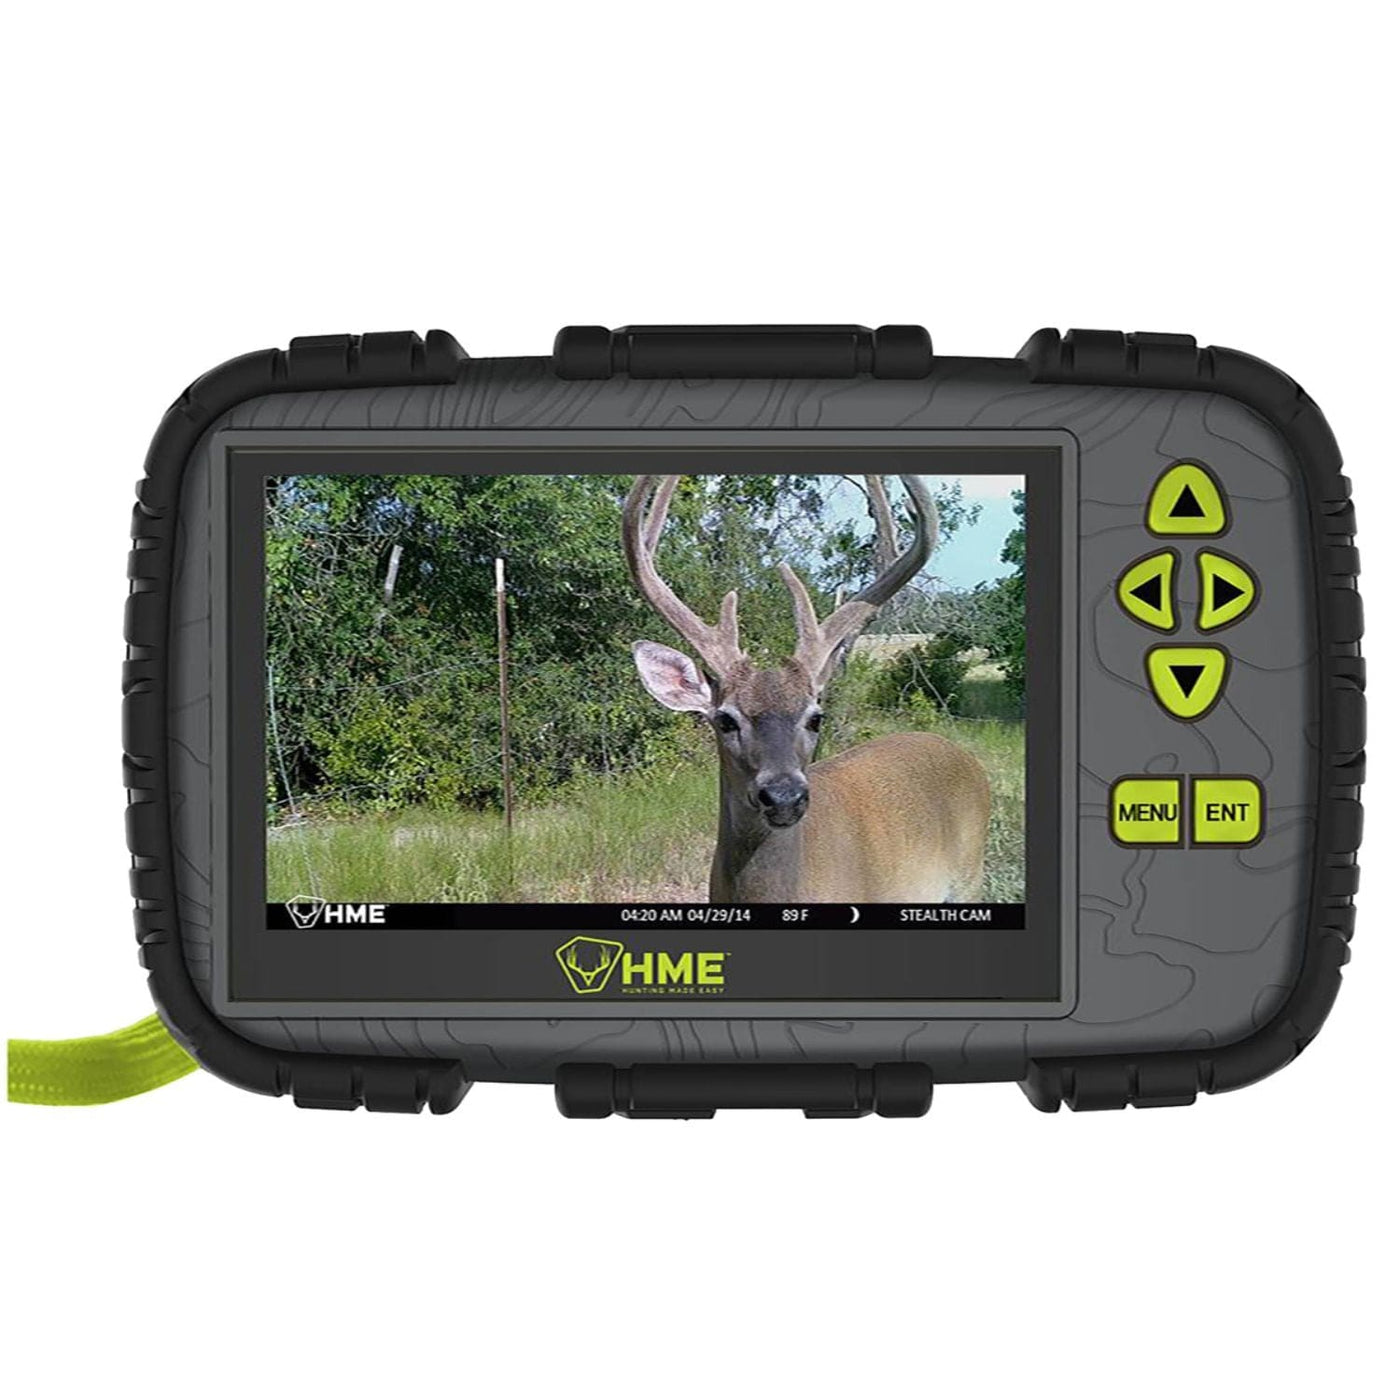 HME HME SD Card Reader Viewer with 4.3 inch LCD Screen Hunting